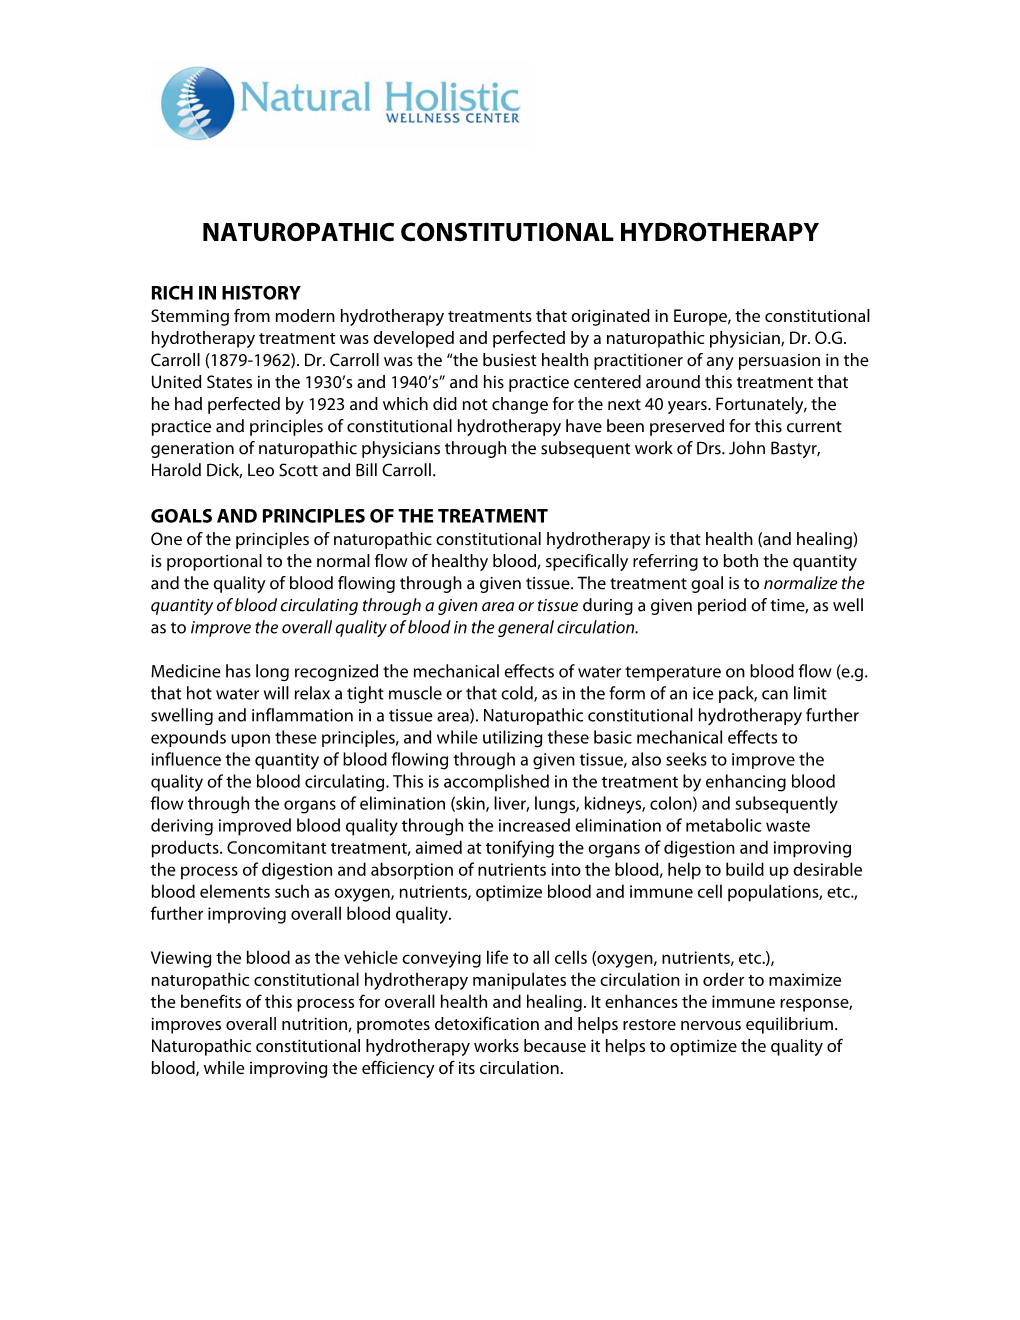 Naturopathic Constitutional Hydrotherapy